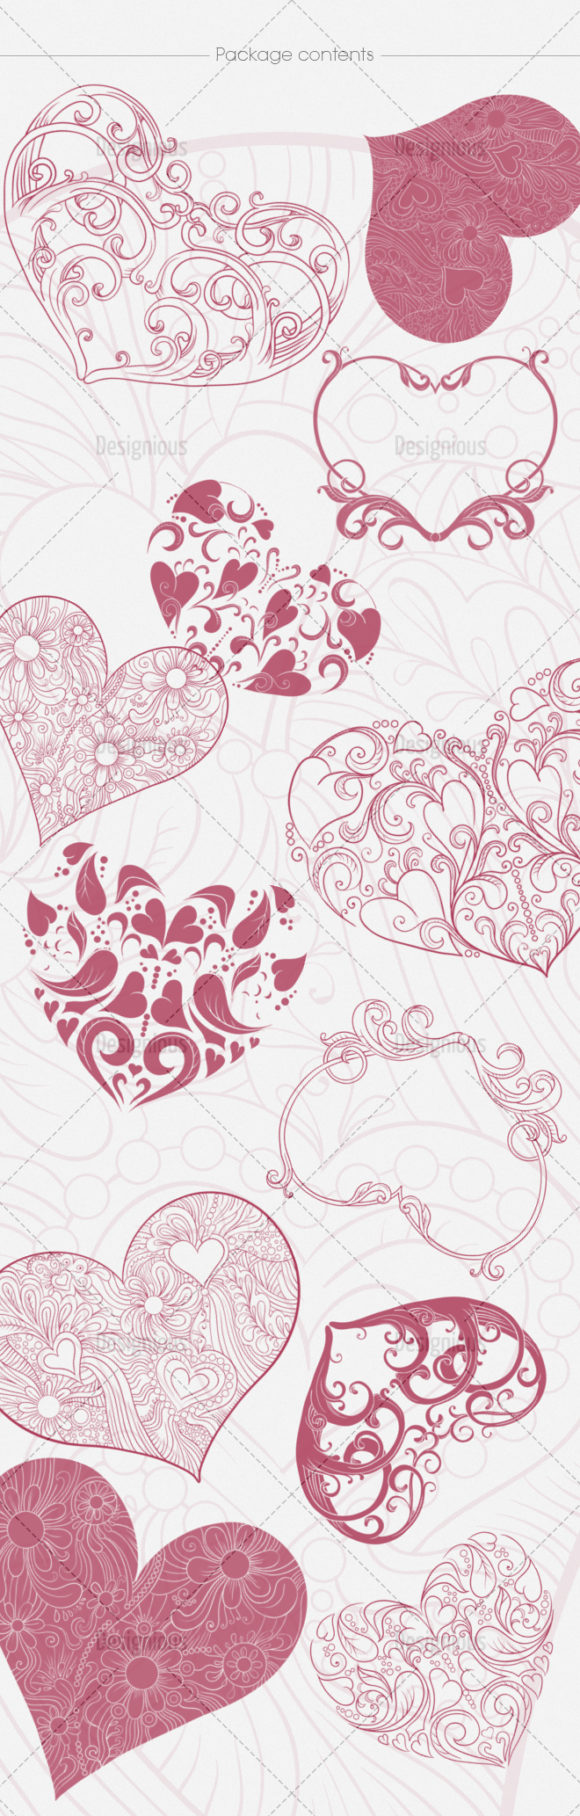 Hearts Brushes Pack 3 2